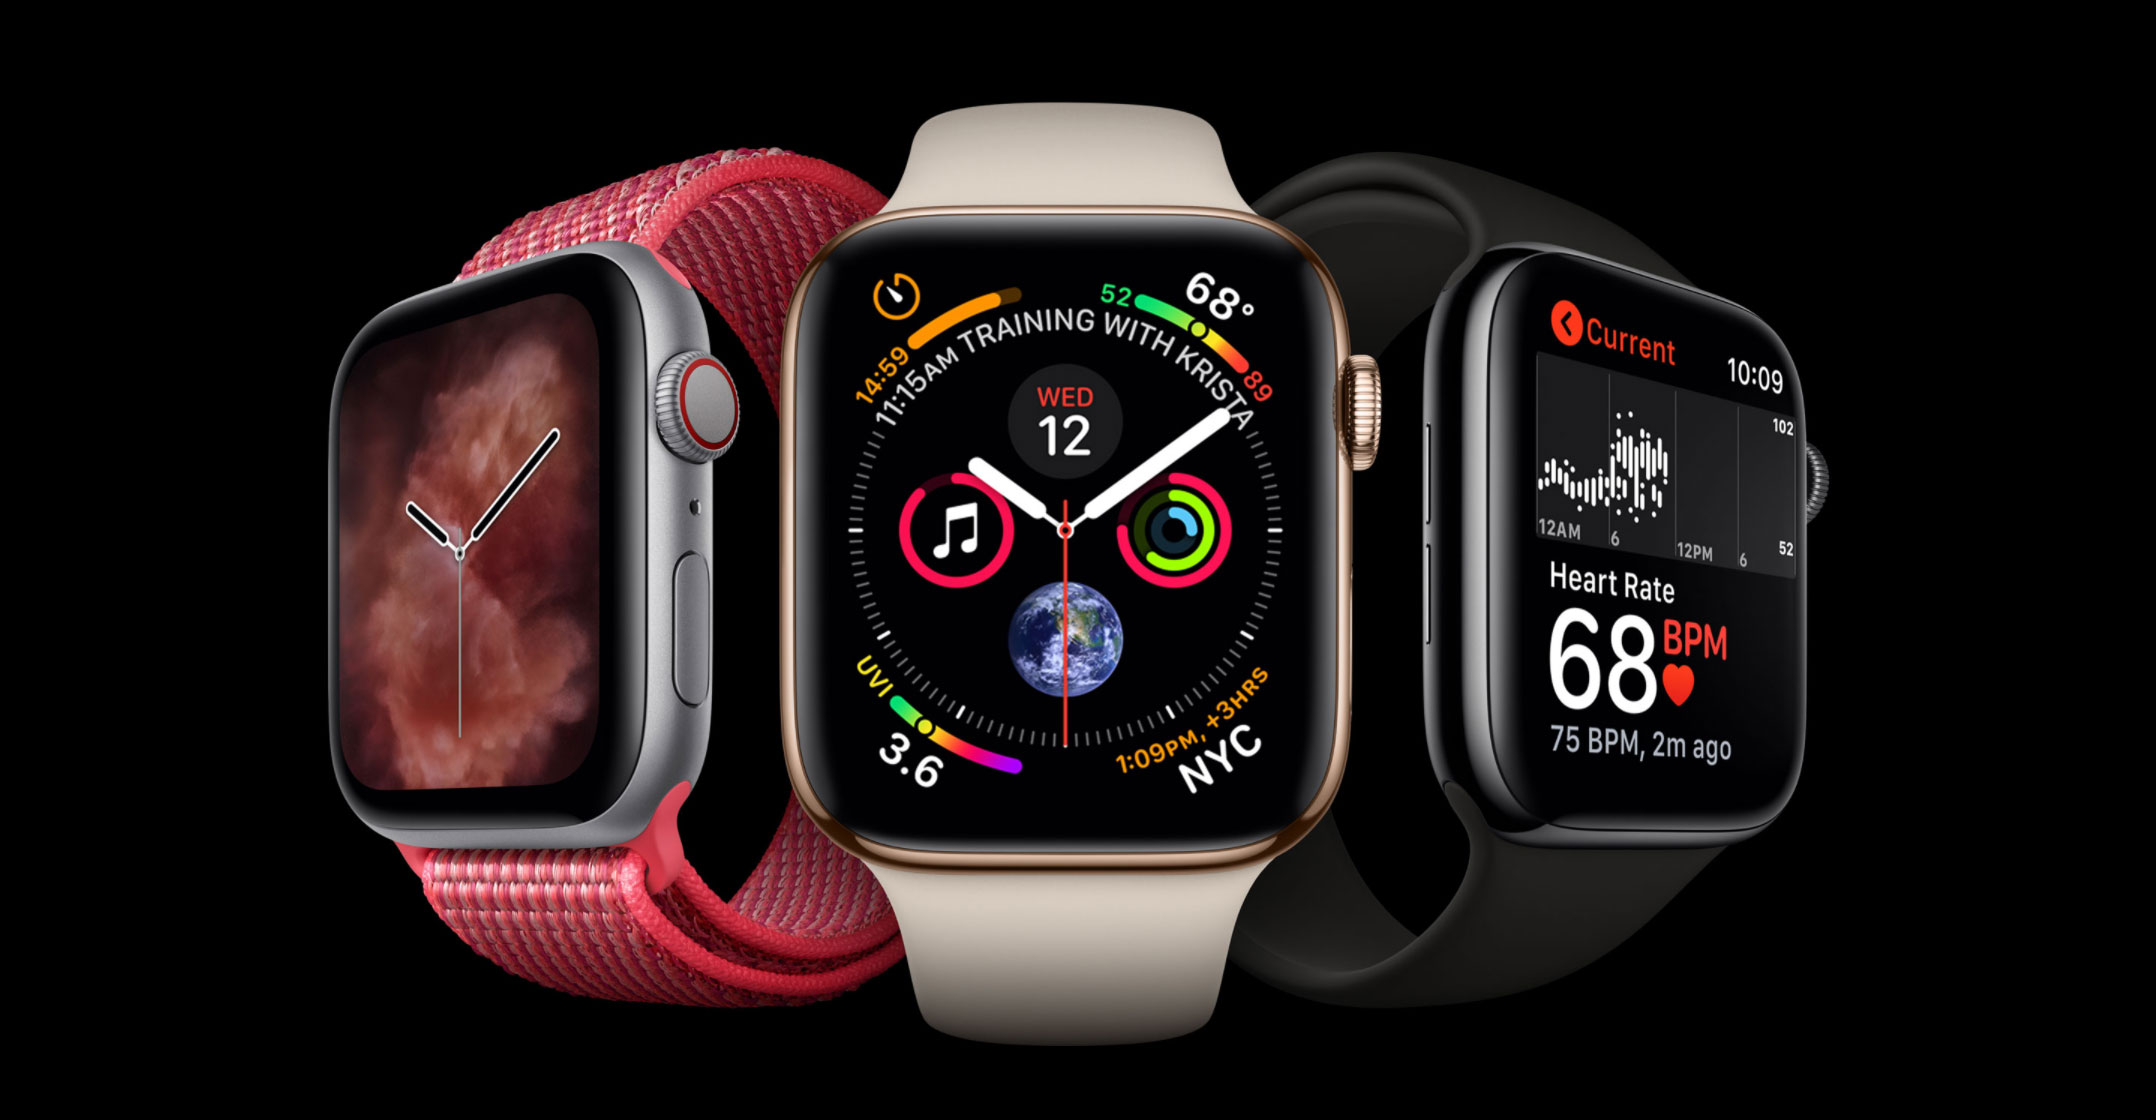 Apple touts advanced health features in Watch Series 4